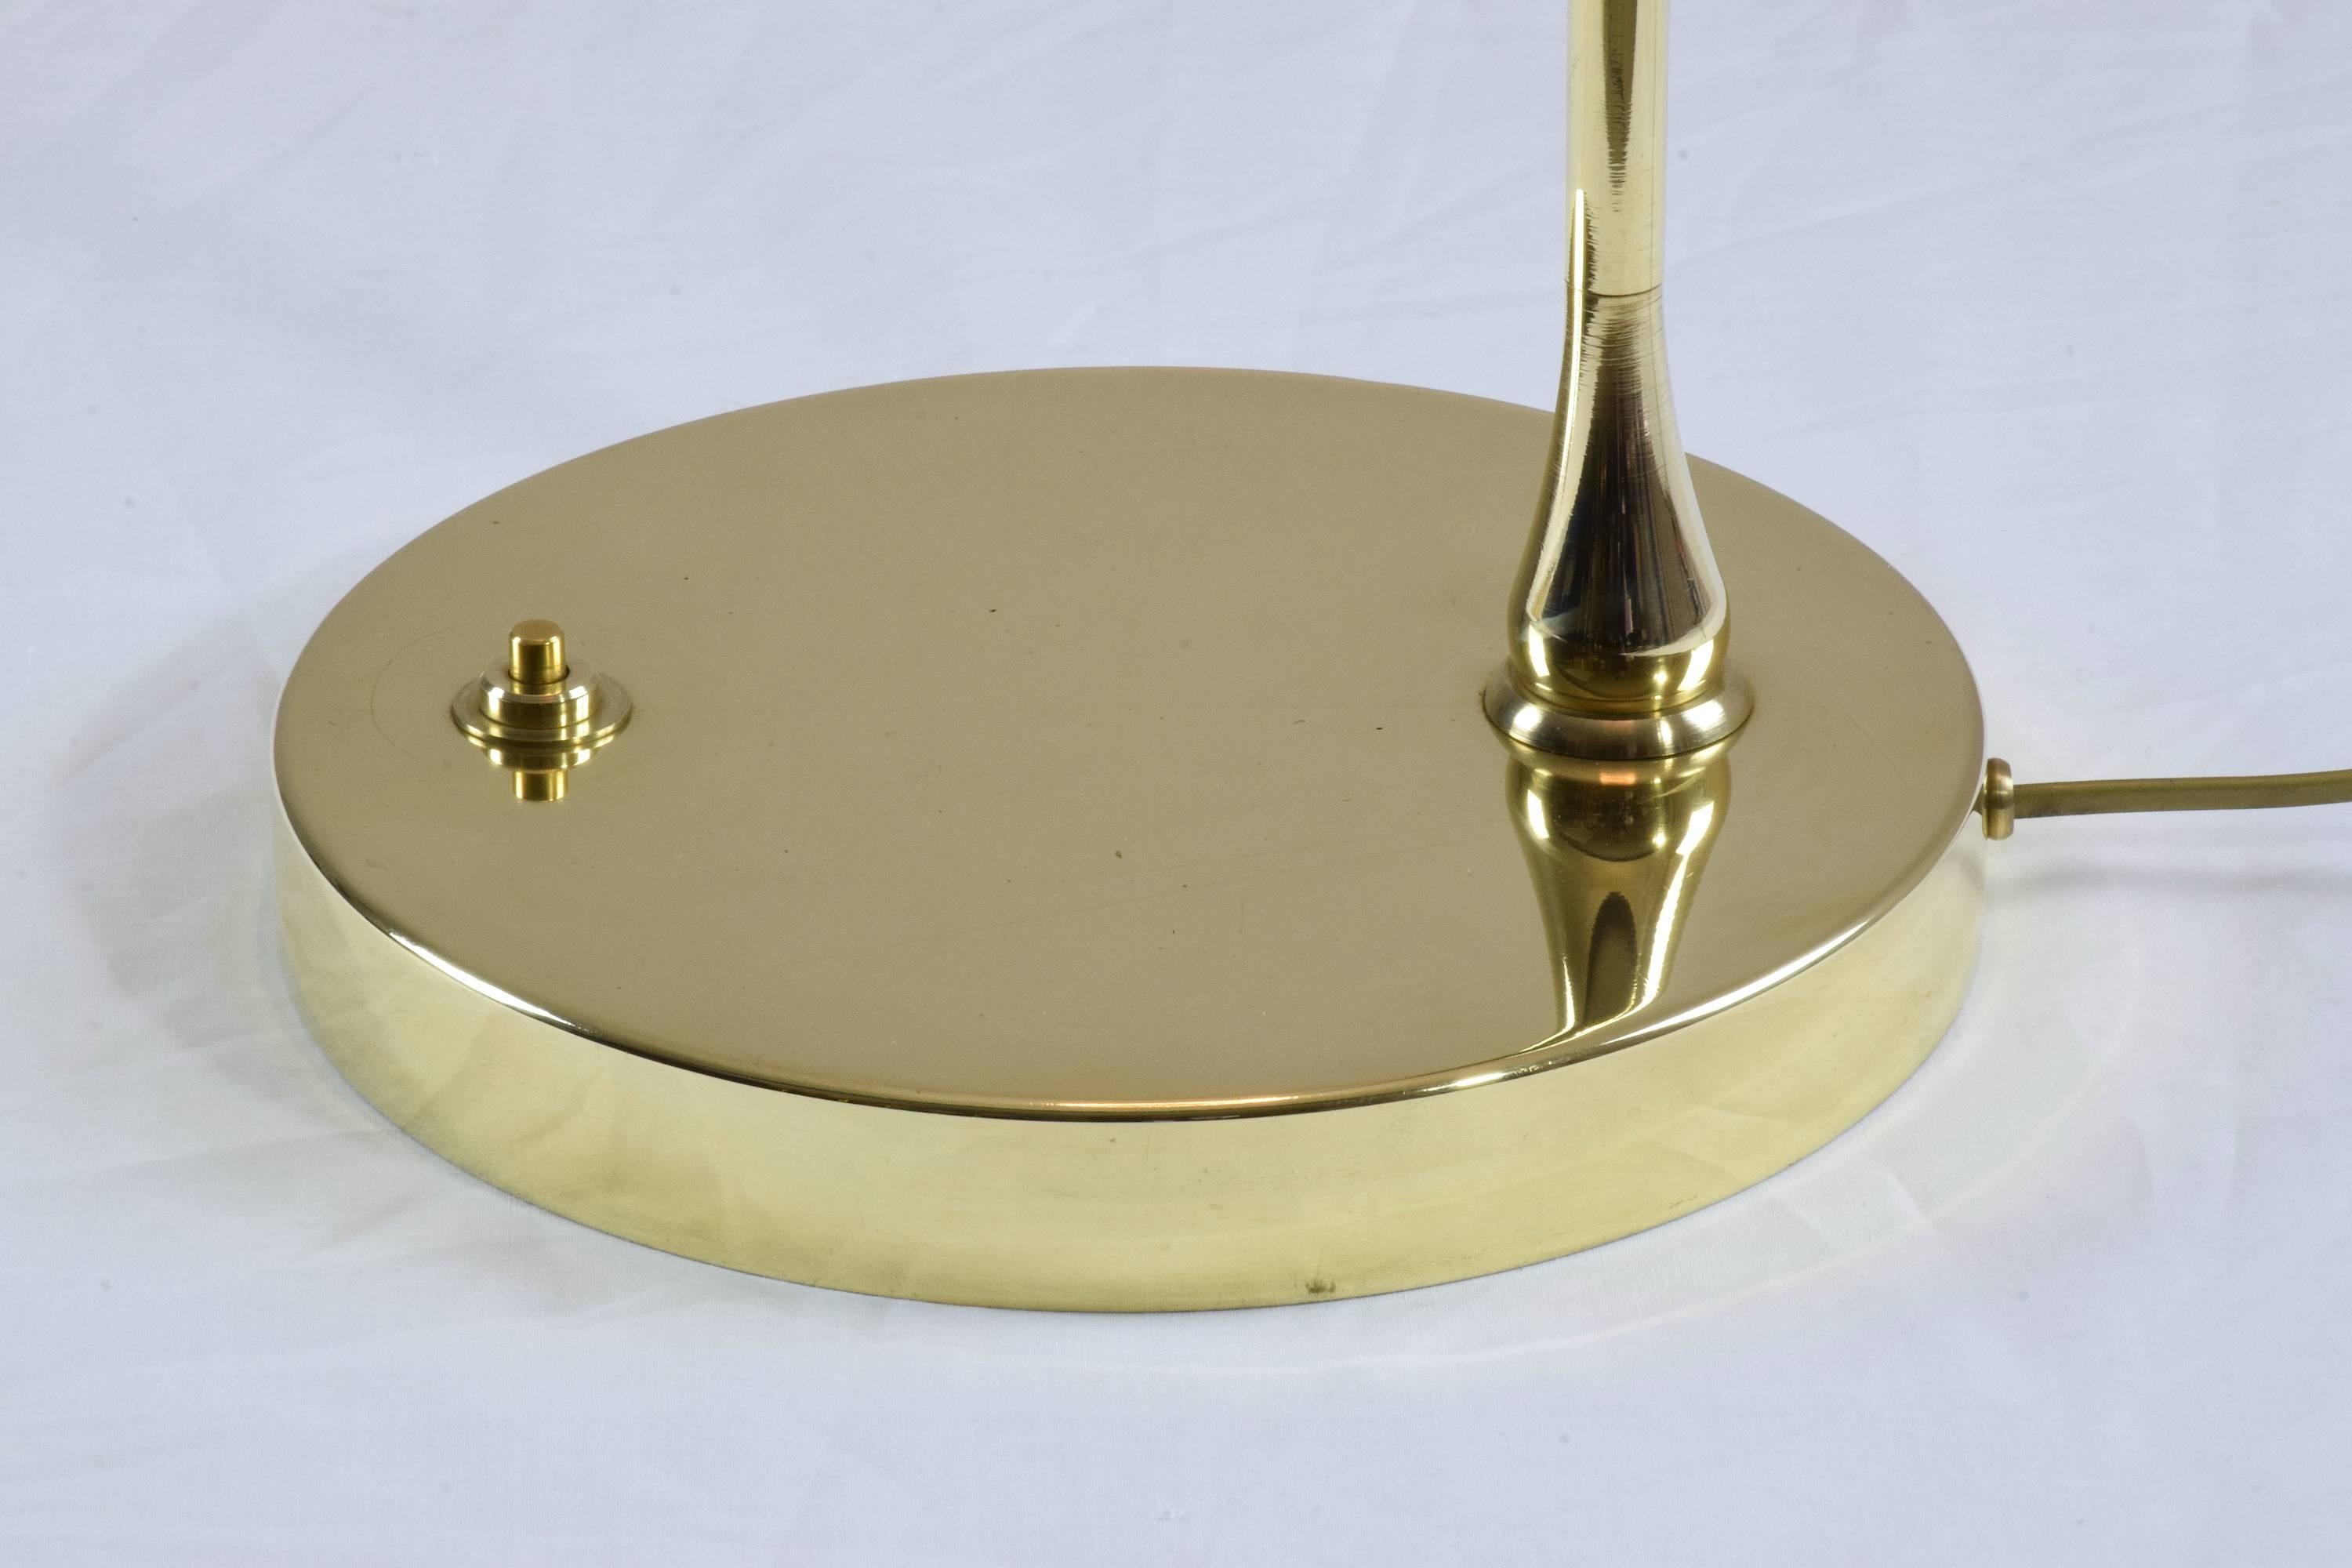 Modern Equilibrium-I Contemporary Handcrafted Adjustable Brass Floor Lamp